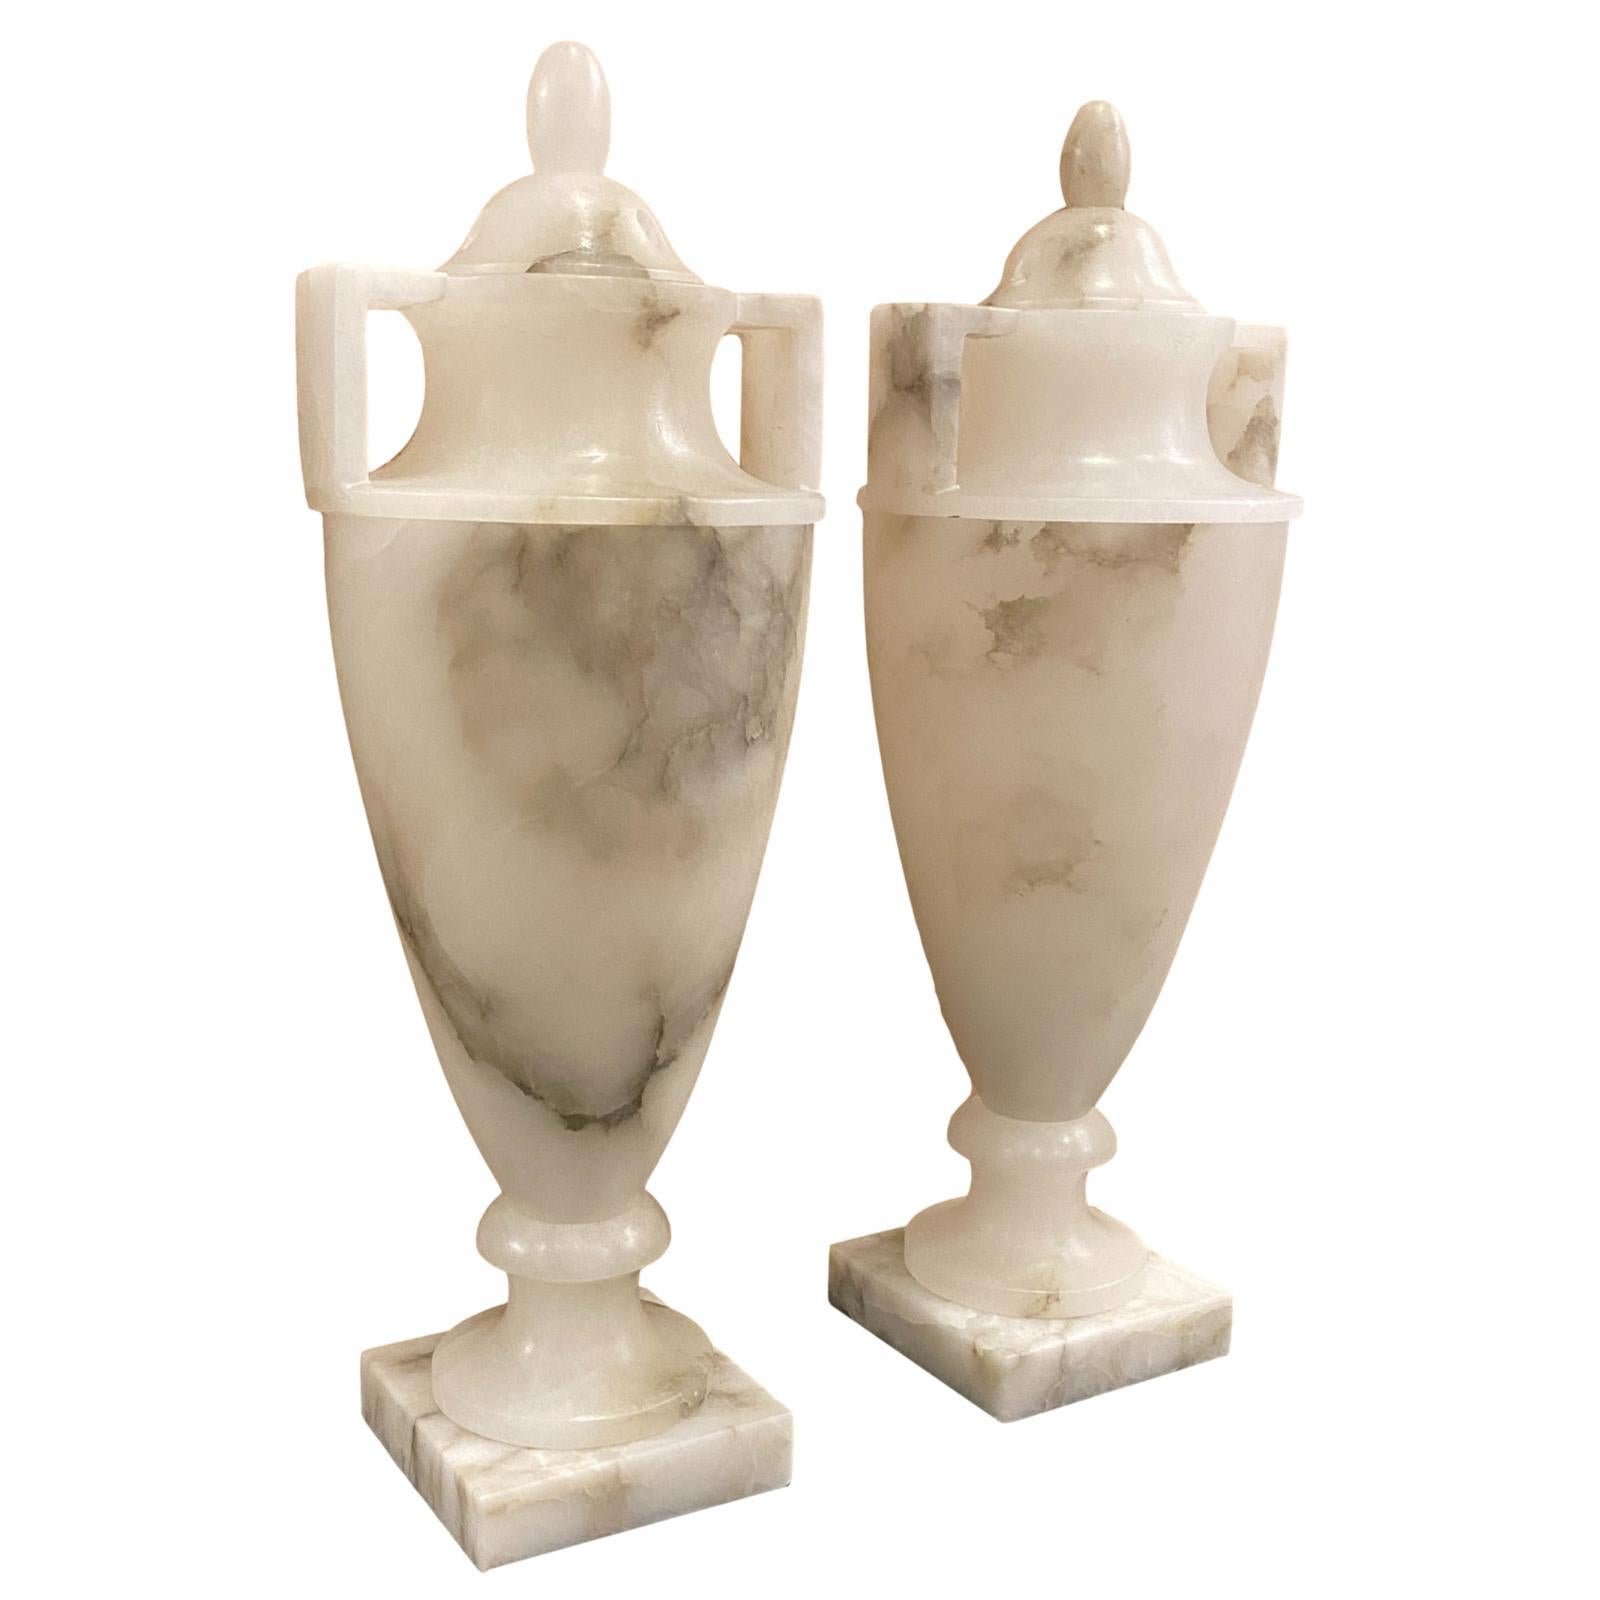 Pair of circa 1950's Italian carved and lidded urn-shaped alabaster table lamps with interior light.

Measurements:
Height: 17.5